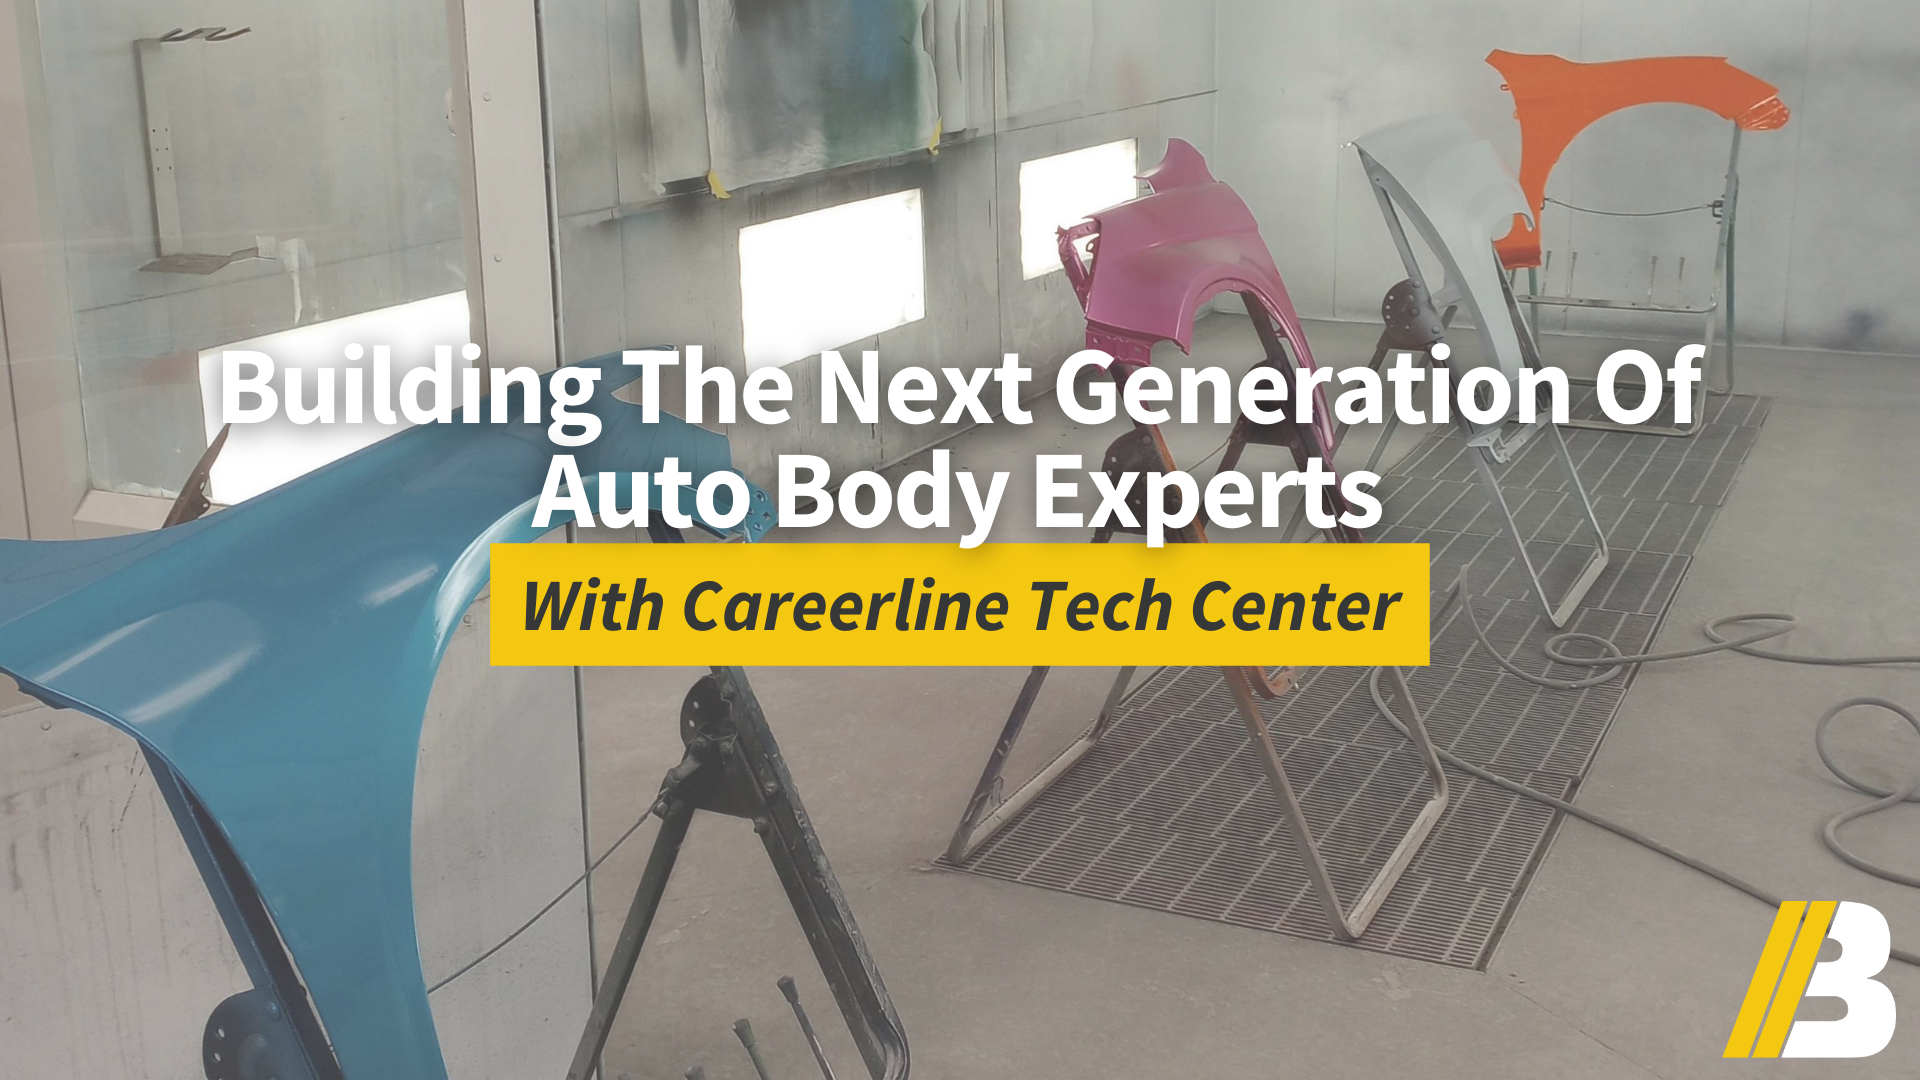 Careerline Tech Center: Building the Next Generation of Auto Body Experts With a Helping Hand from Bumpers That Deliver